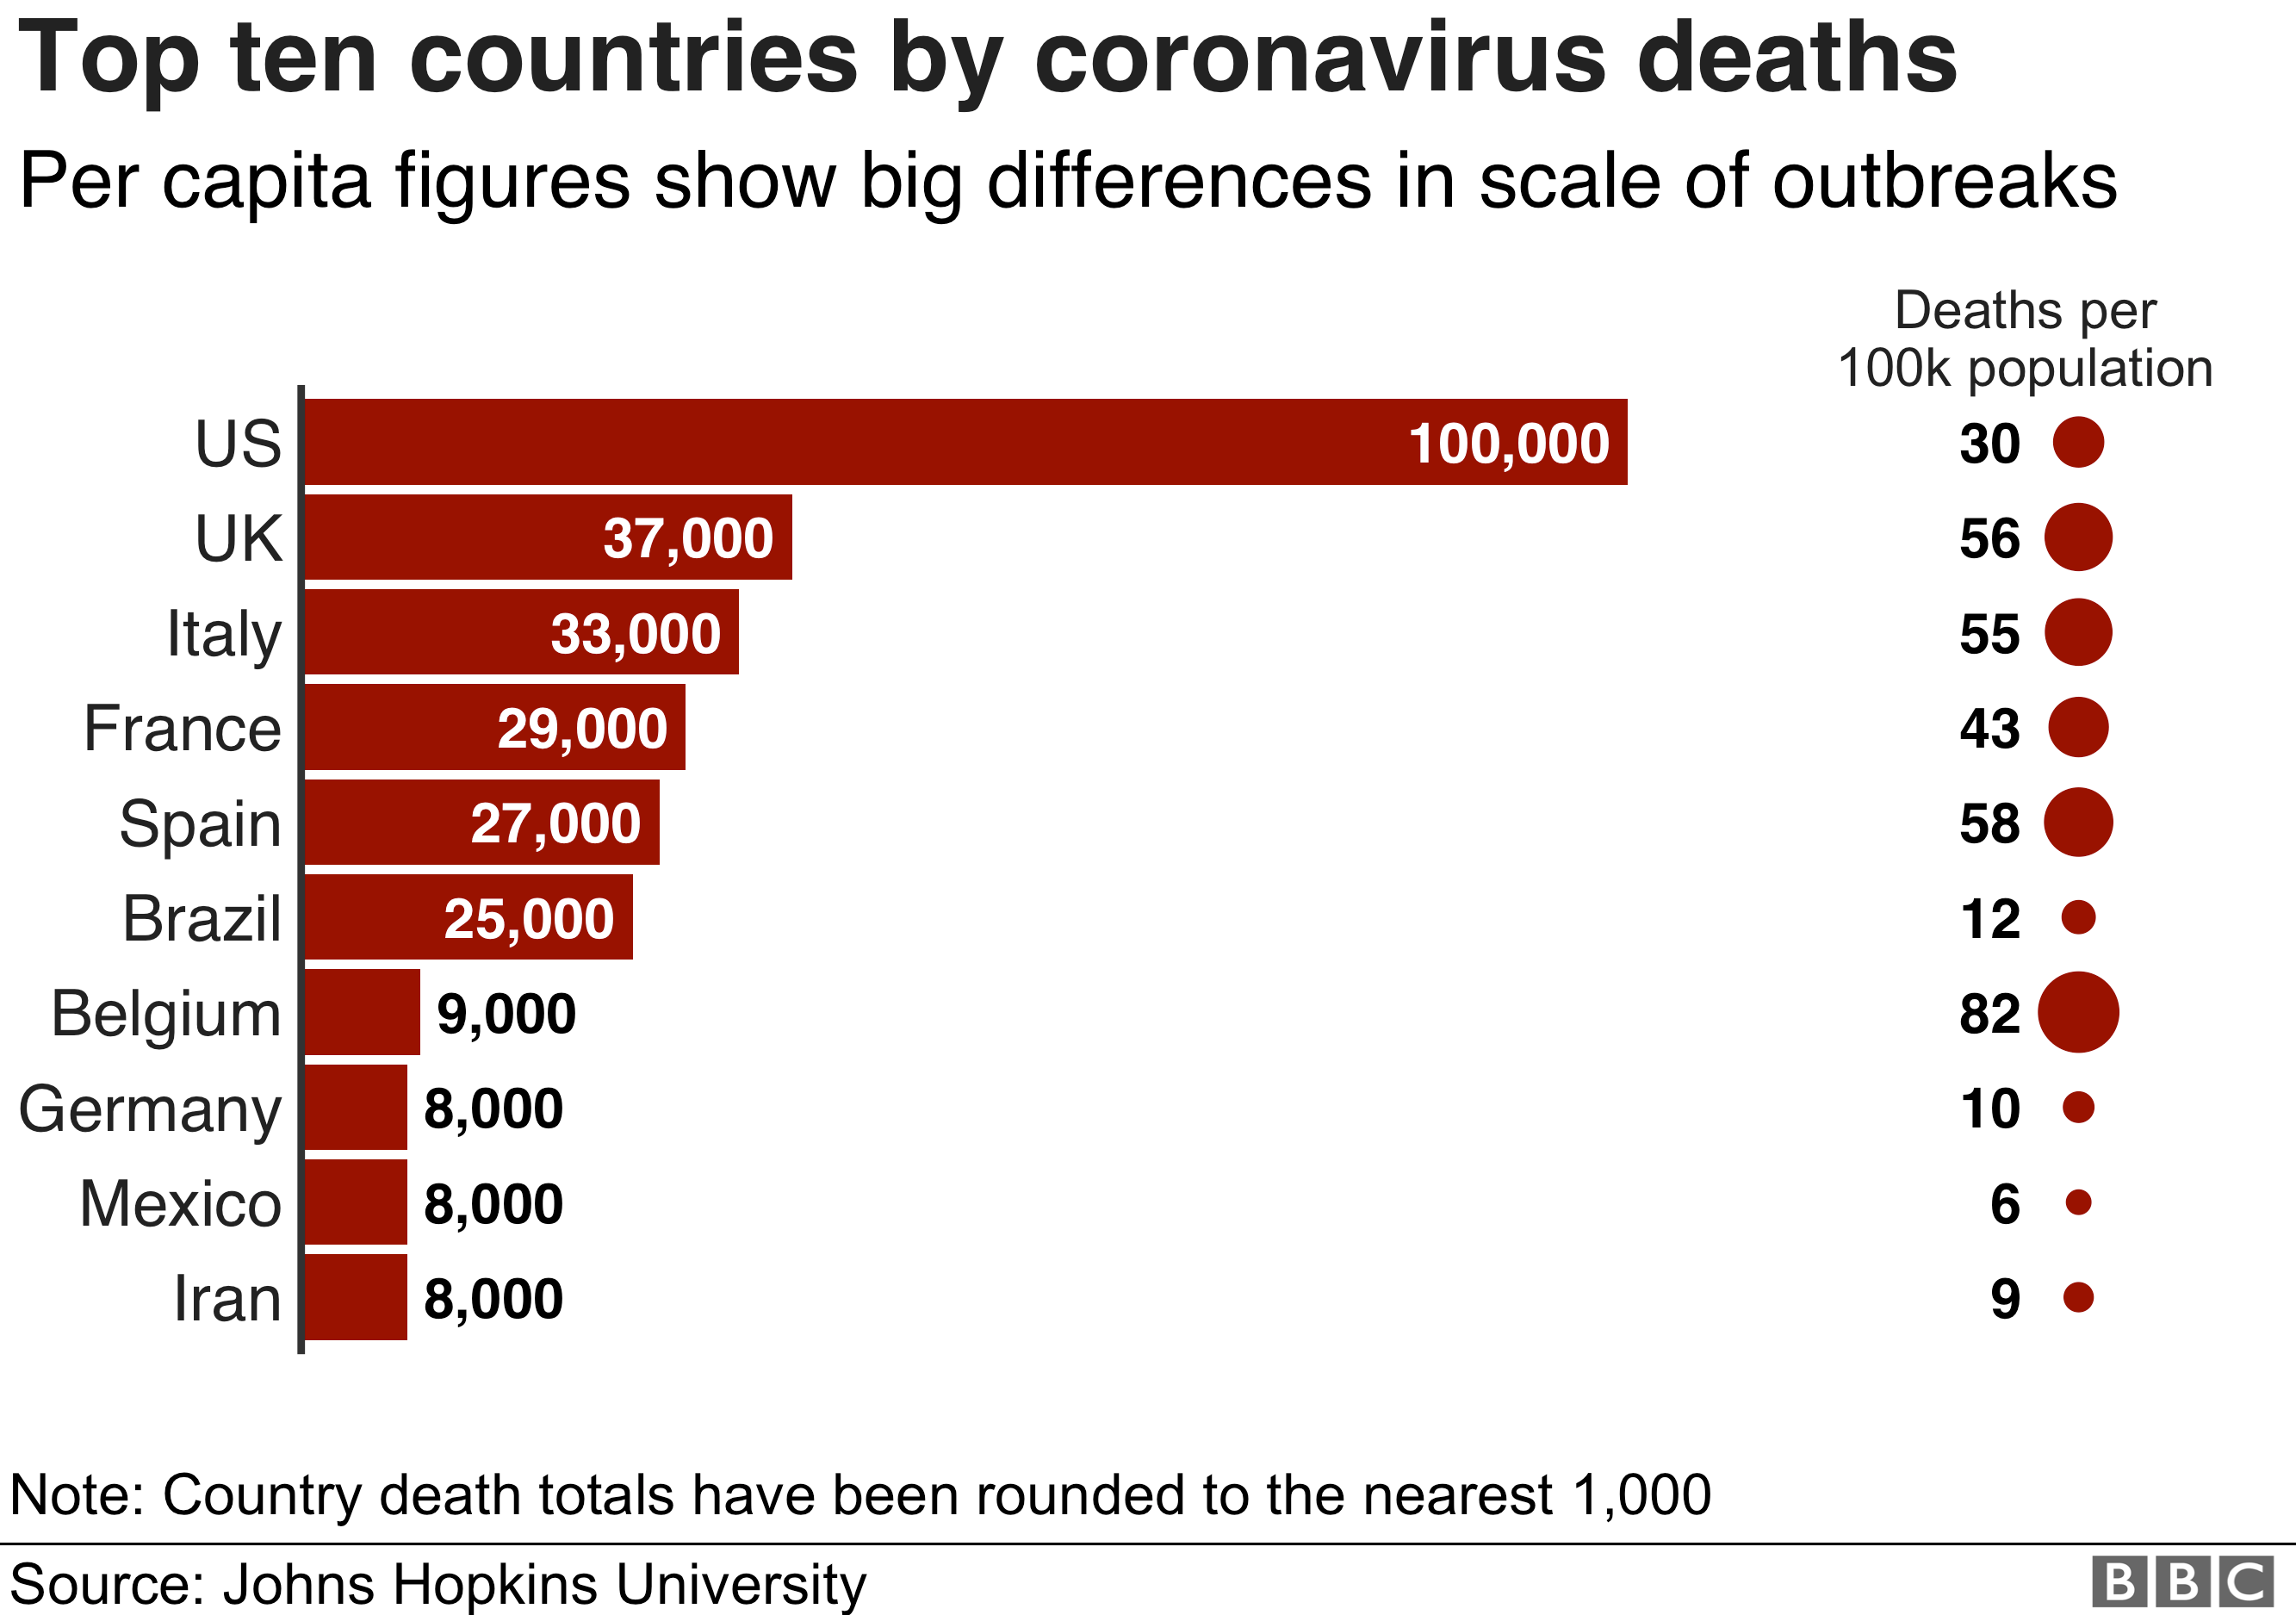 covid deaths in us by day